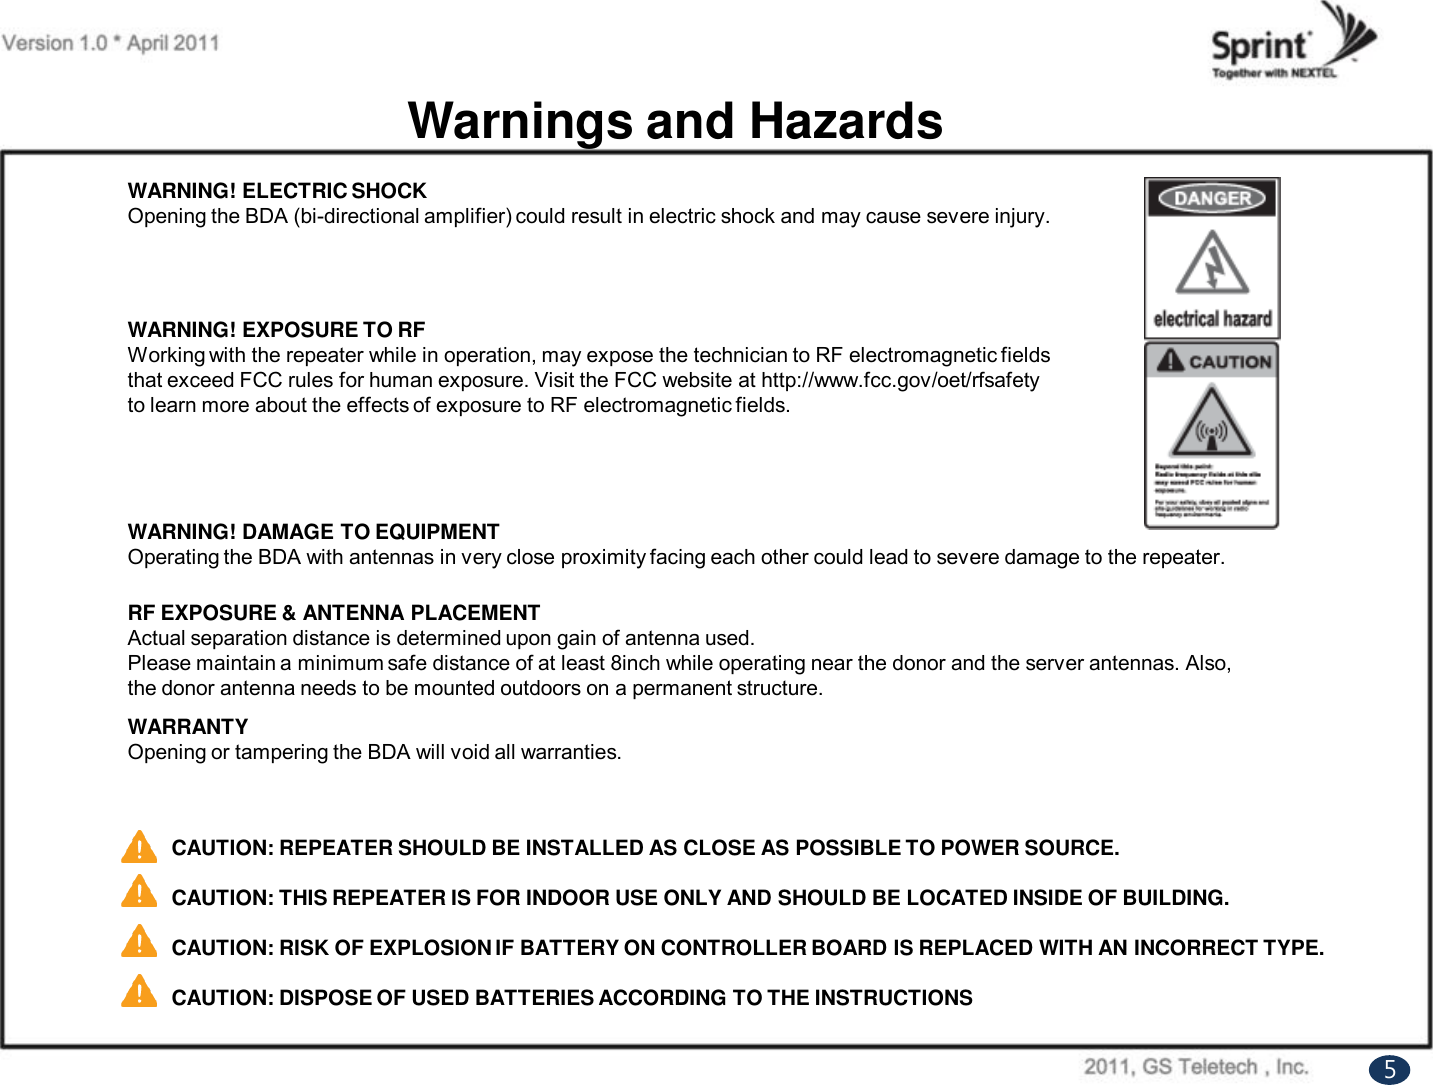 WARNING! EXPOSURE TO RFWorking with the repeater while in operation, may expose the technician to RF electromagnetic fieldsthat exceed FCC rules for human exposure. Visit the FCC website at http://www.fcc.gov/oet/rfsafetyto learn more about the effects of exposure to RF electromagnetic fields.Warnings and HazardsWARNING! ELECTRIC SHOCKOpening the BDA (bi-directional amplifier) could result in electric shock and may cause severe injury.WARNING! DAMAGE TO EQUIPMENTOperating the BDA with antennas in very close proximity facing each other could lead to severe damage to the repeater.RF EXPOSURE &amp; ANTENNA PLACEMENTActual separation distance is determined upon gain of antenna used.Please maintain a minimum safe distance of at least 8inch while operating near the donor and the server antennas. Also,the donor antenna needs to be mounted outdoors on a permanent structure.WARRANTYOpening or tampering the BDA will void all warranties.CAUTION: REPEATER SHOULD BE INSTALLED AS CLOSE AS POSSIBLE TO POWER SOURCE.CAUTION: THIS REPEATER IS FOR INDOOR USE ONLY AND SHOULD BE LOCATED INSIDE OF BUILDING.CAUTION: RISK OF EXPLOSION IF BATTERY ON CONTROLLER BOARD IS REPLACED WITH AN INCORRECT TYPE.CAUTION: DISPOSE OF USED BATTERIES ACCORDING TO THE INSTRUCTIONS5